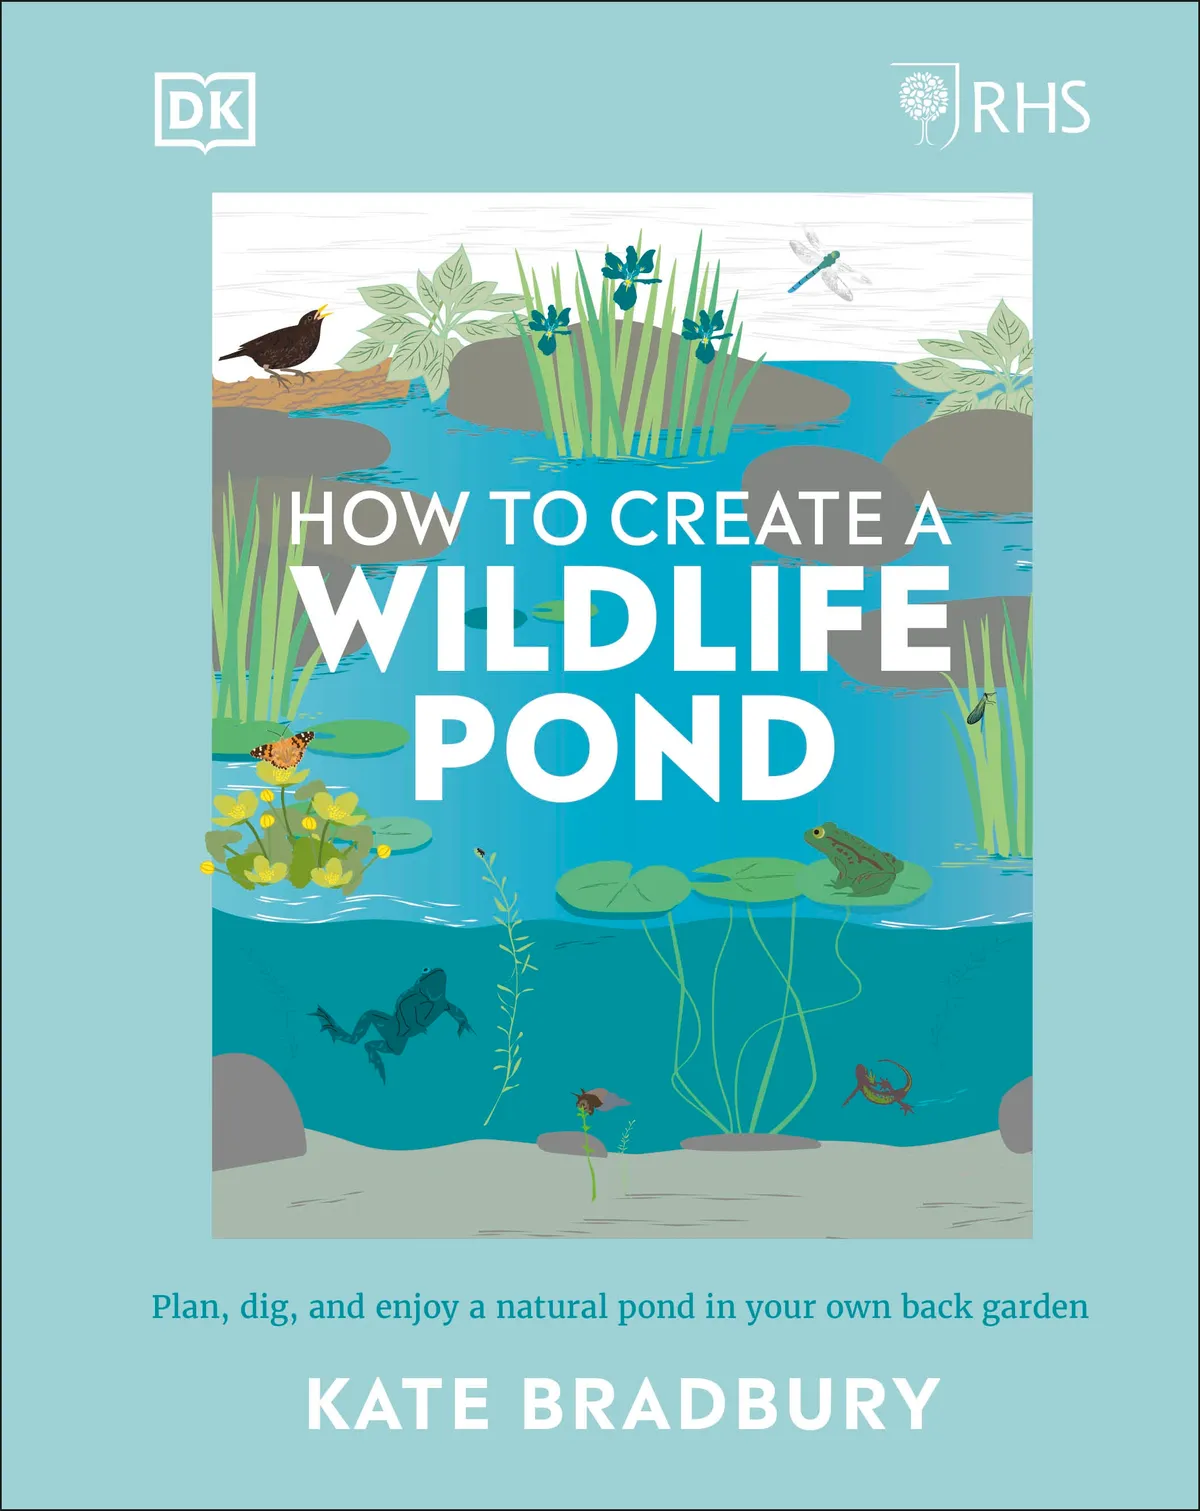 How to create a wildlife pond book jacket